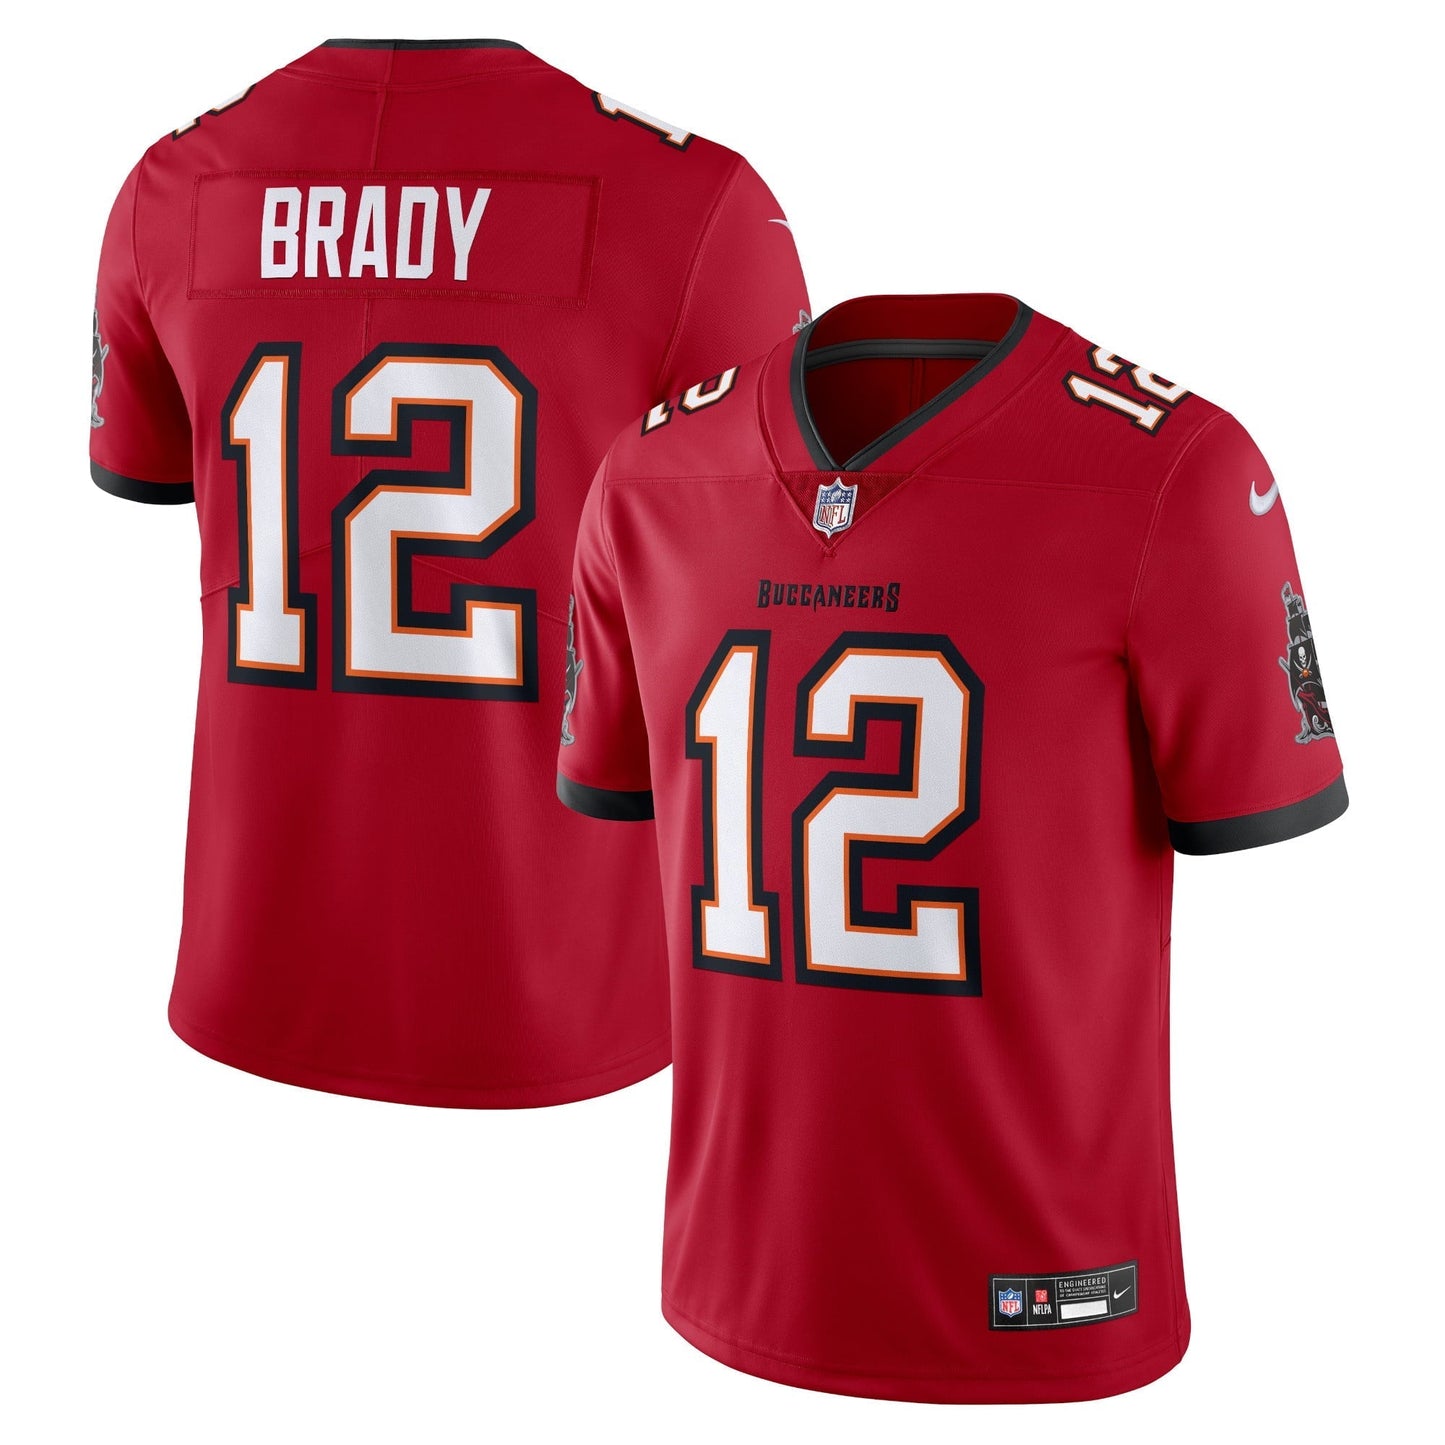 Men's Nike Tom Brady Red Tampa Bay Buccaneers  Vapor Untouchable Limited Jersey